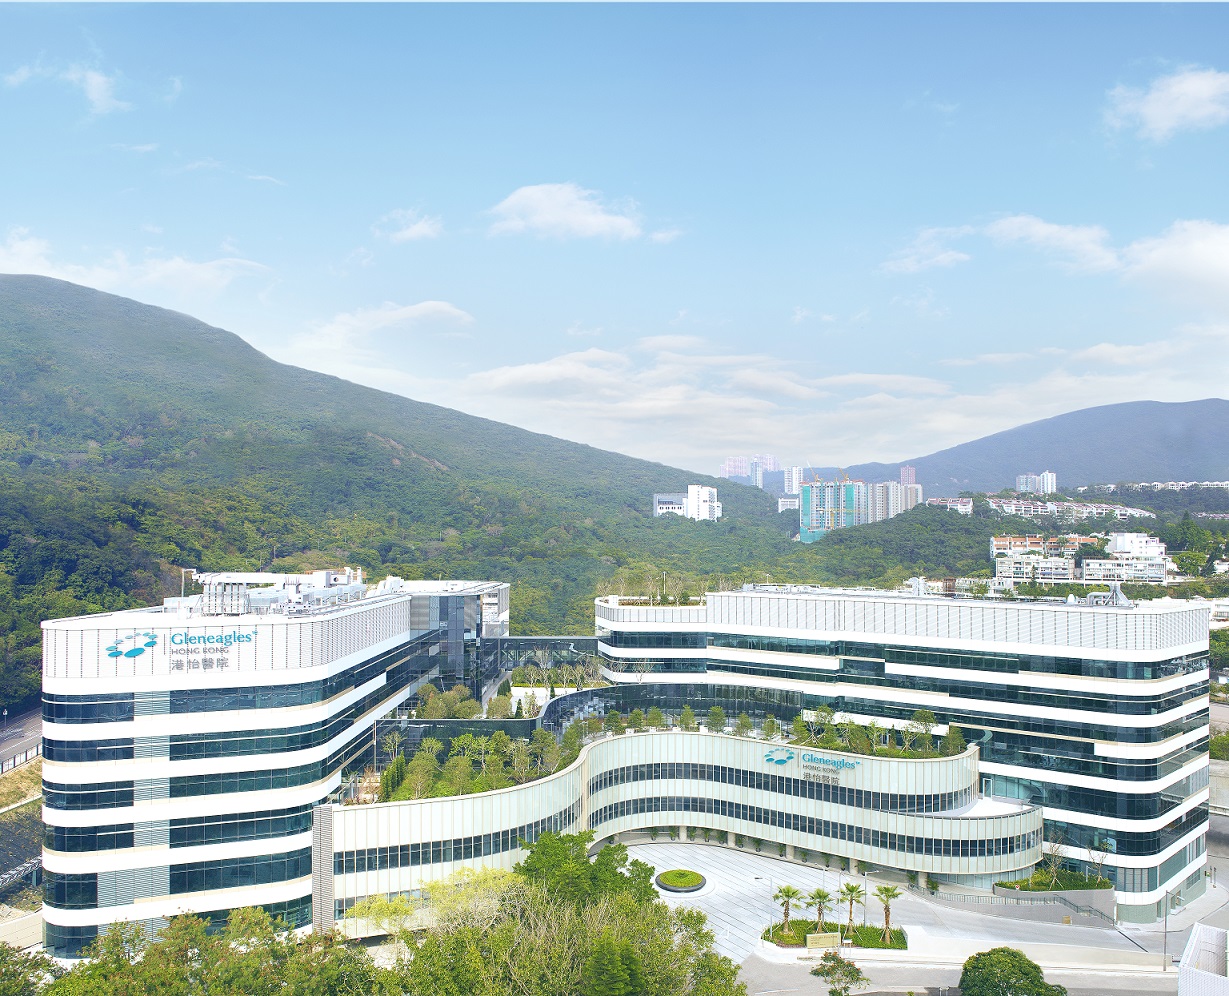 Newly opened in March, Gleneagles Hong Kong Hospital is a 500-bed multi-specialty, private tertiary hospital with cutting-edge medical technologies